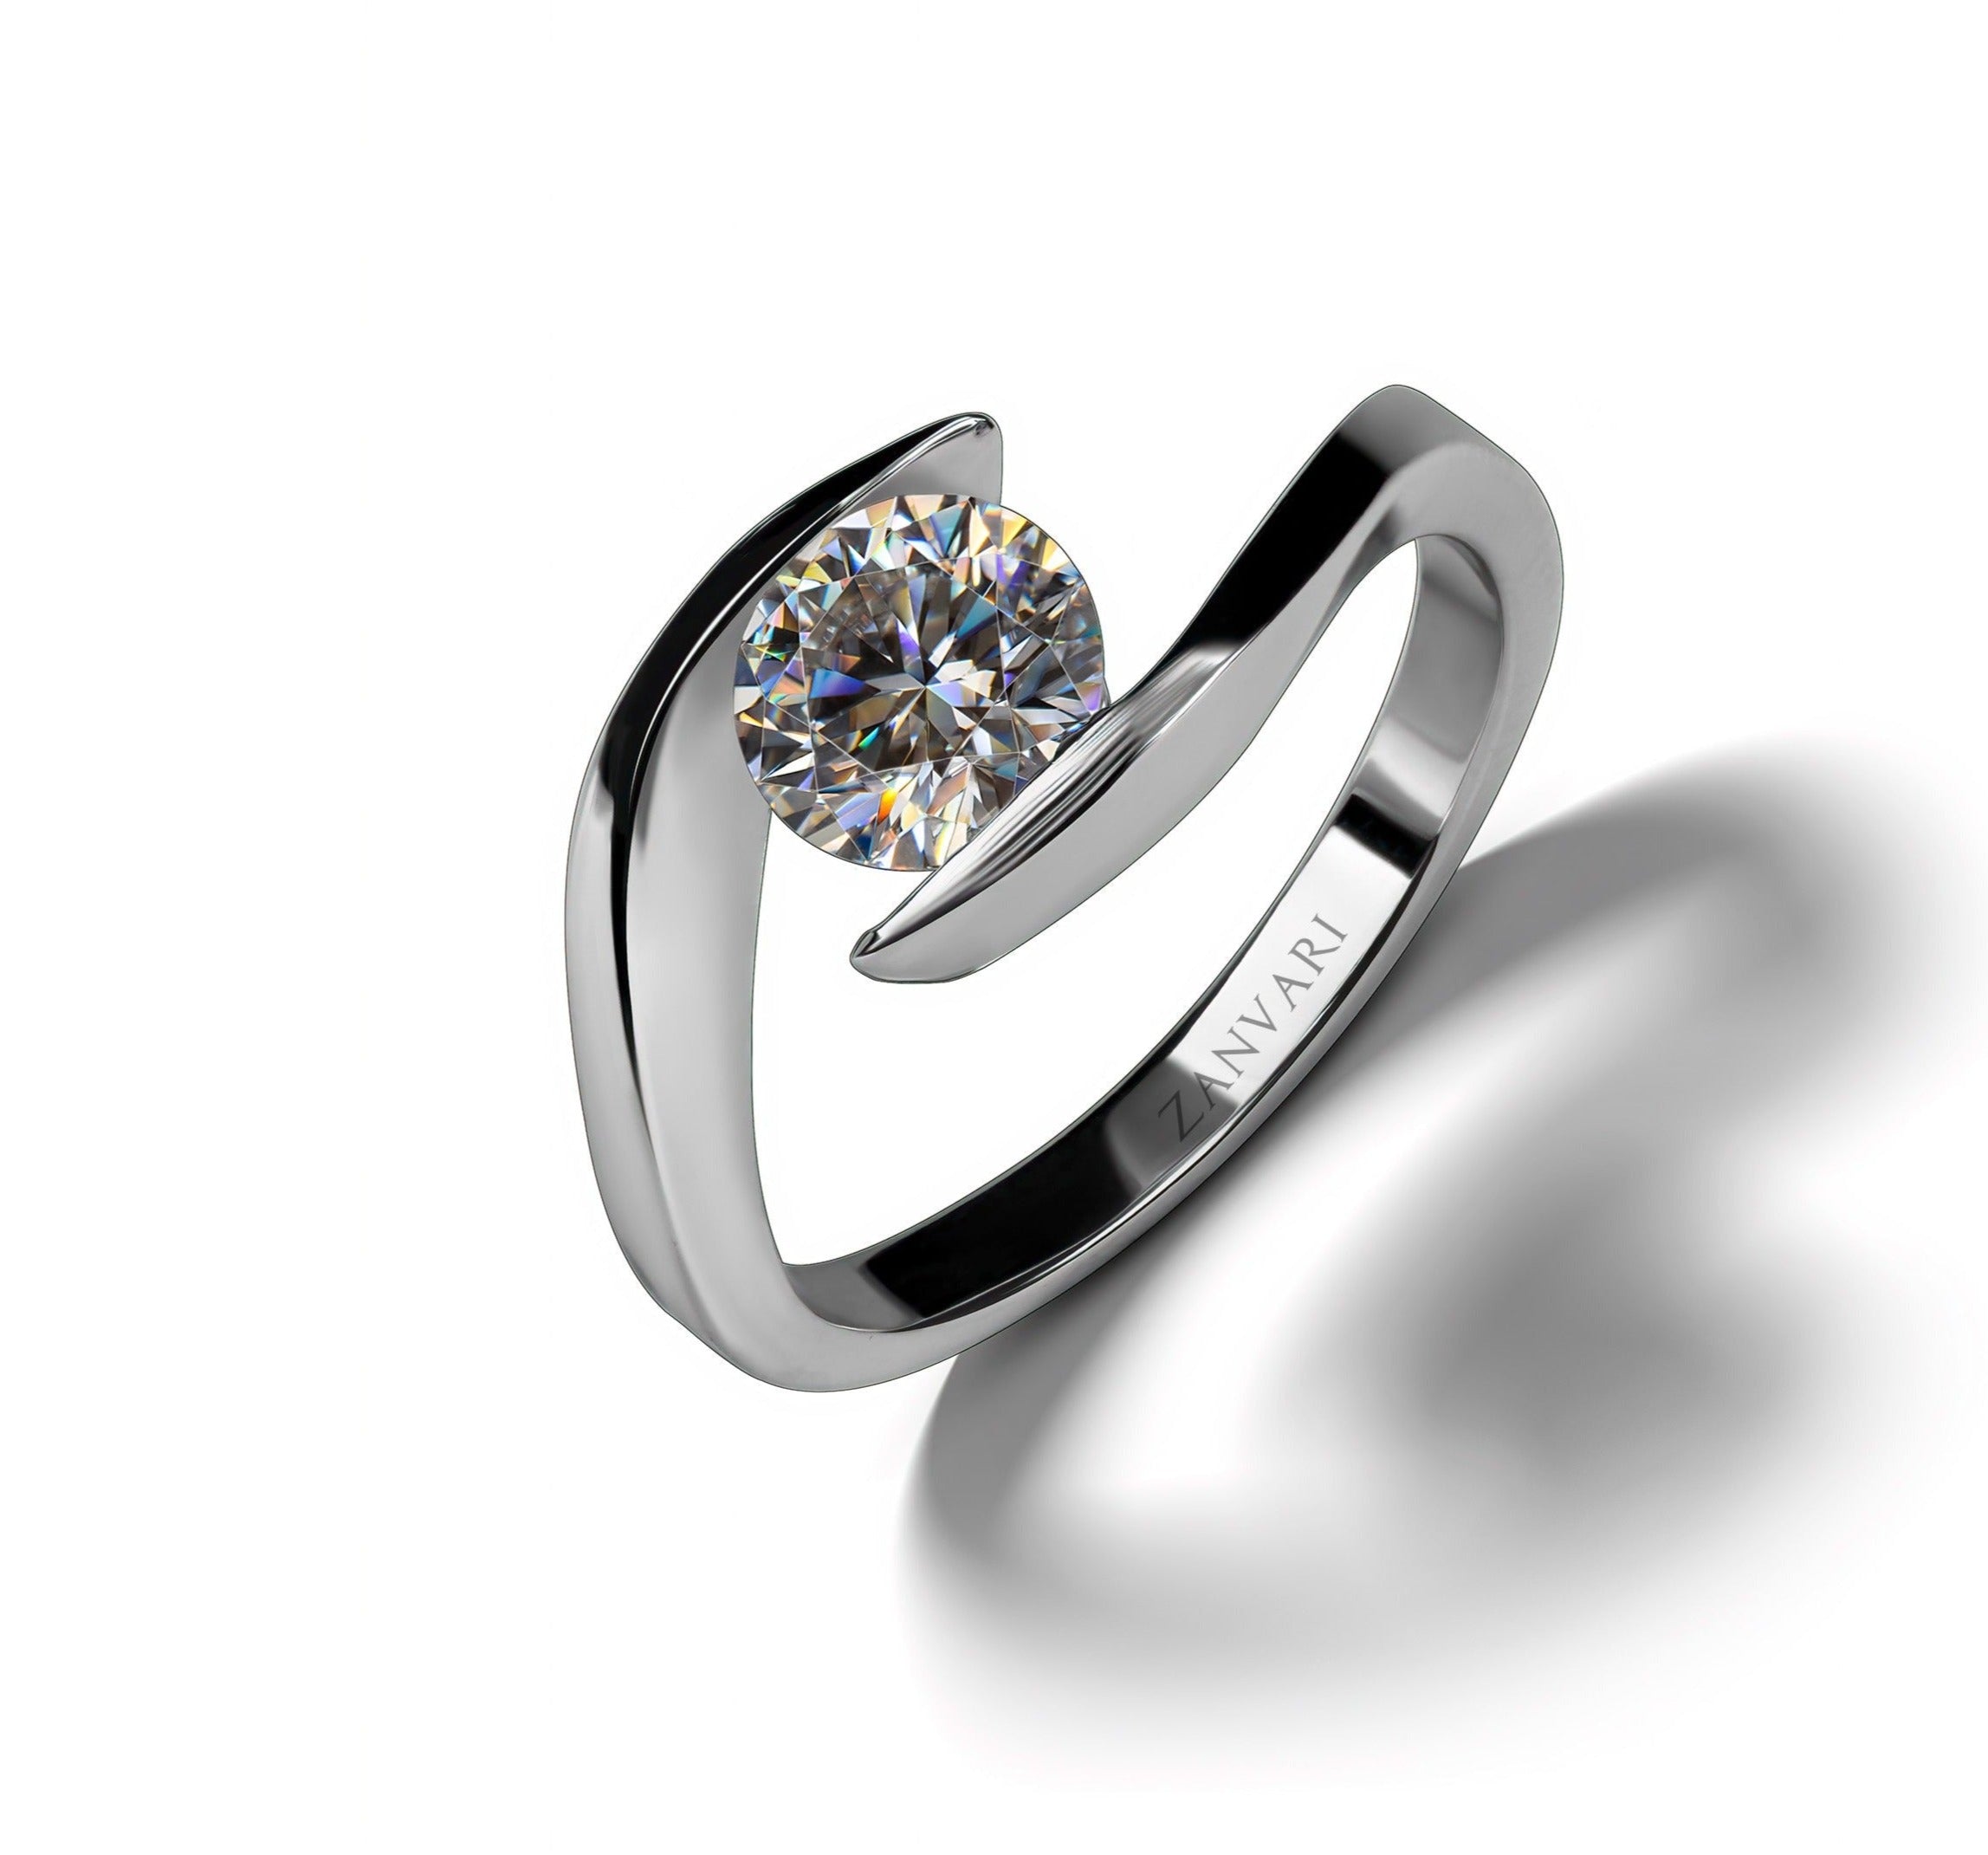 Buy jewelies 0.10 CT Round Brilliant Solitaire 925 Sterling Silver  Engagement Ring at Amazon.in